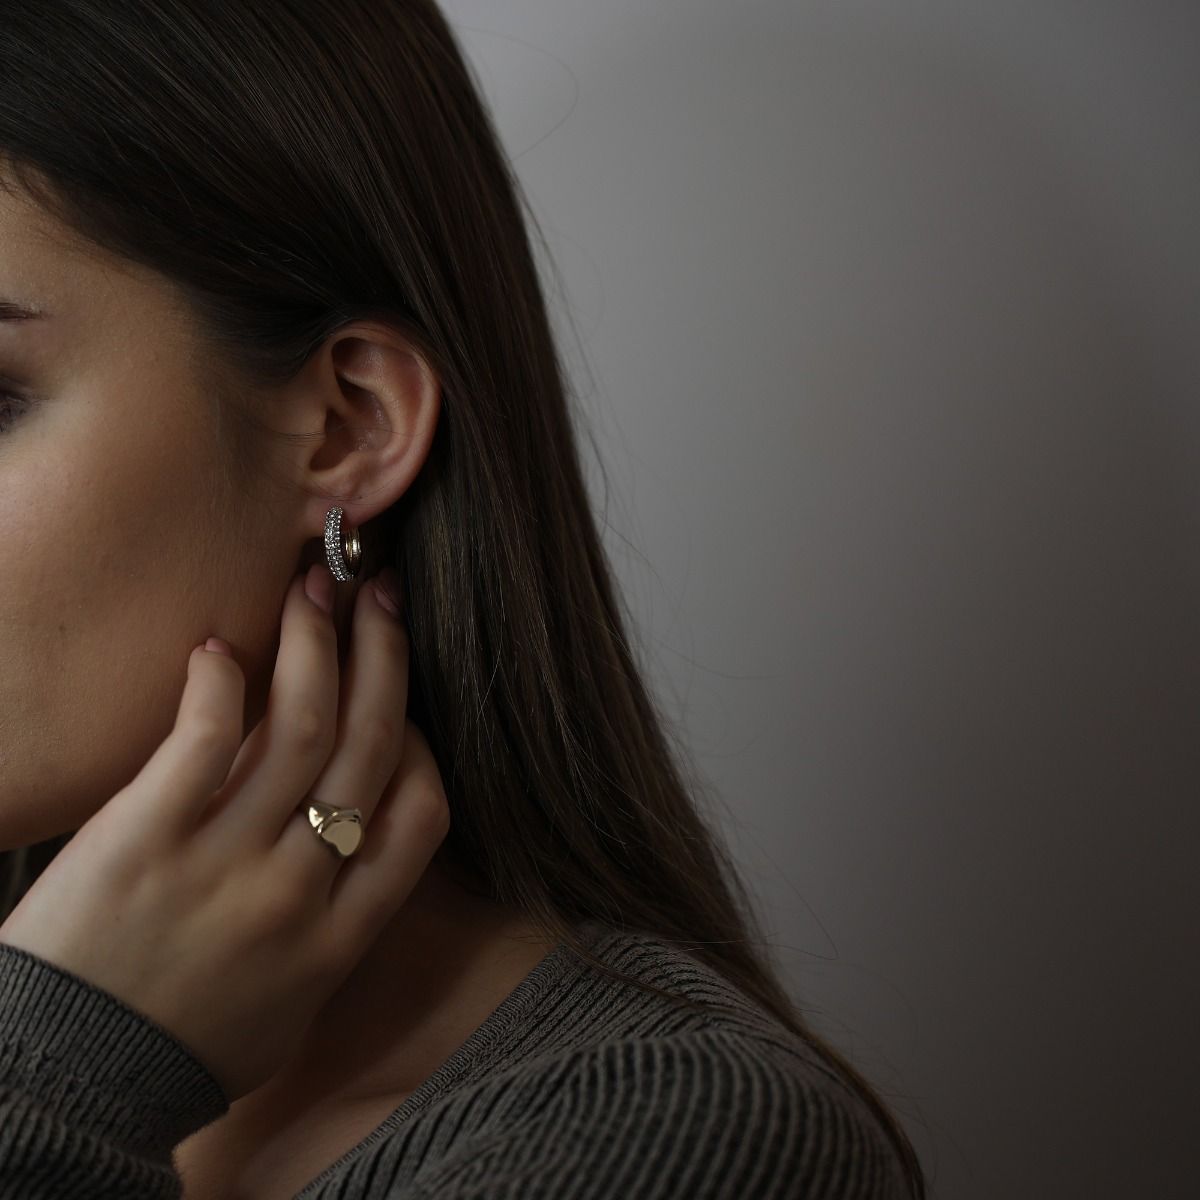 The Two-Tone Pave Huggie Earrings are exquisite pieces that effortlessly combine elegance and glamour. The sparkling pave detailing exudes sophistication, whilst making it an everyday staple.